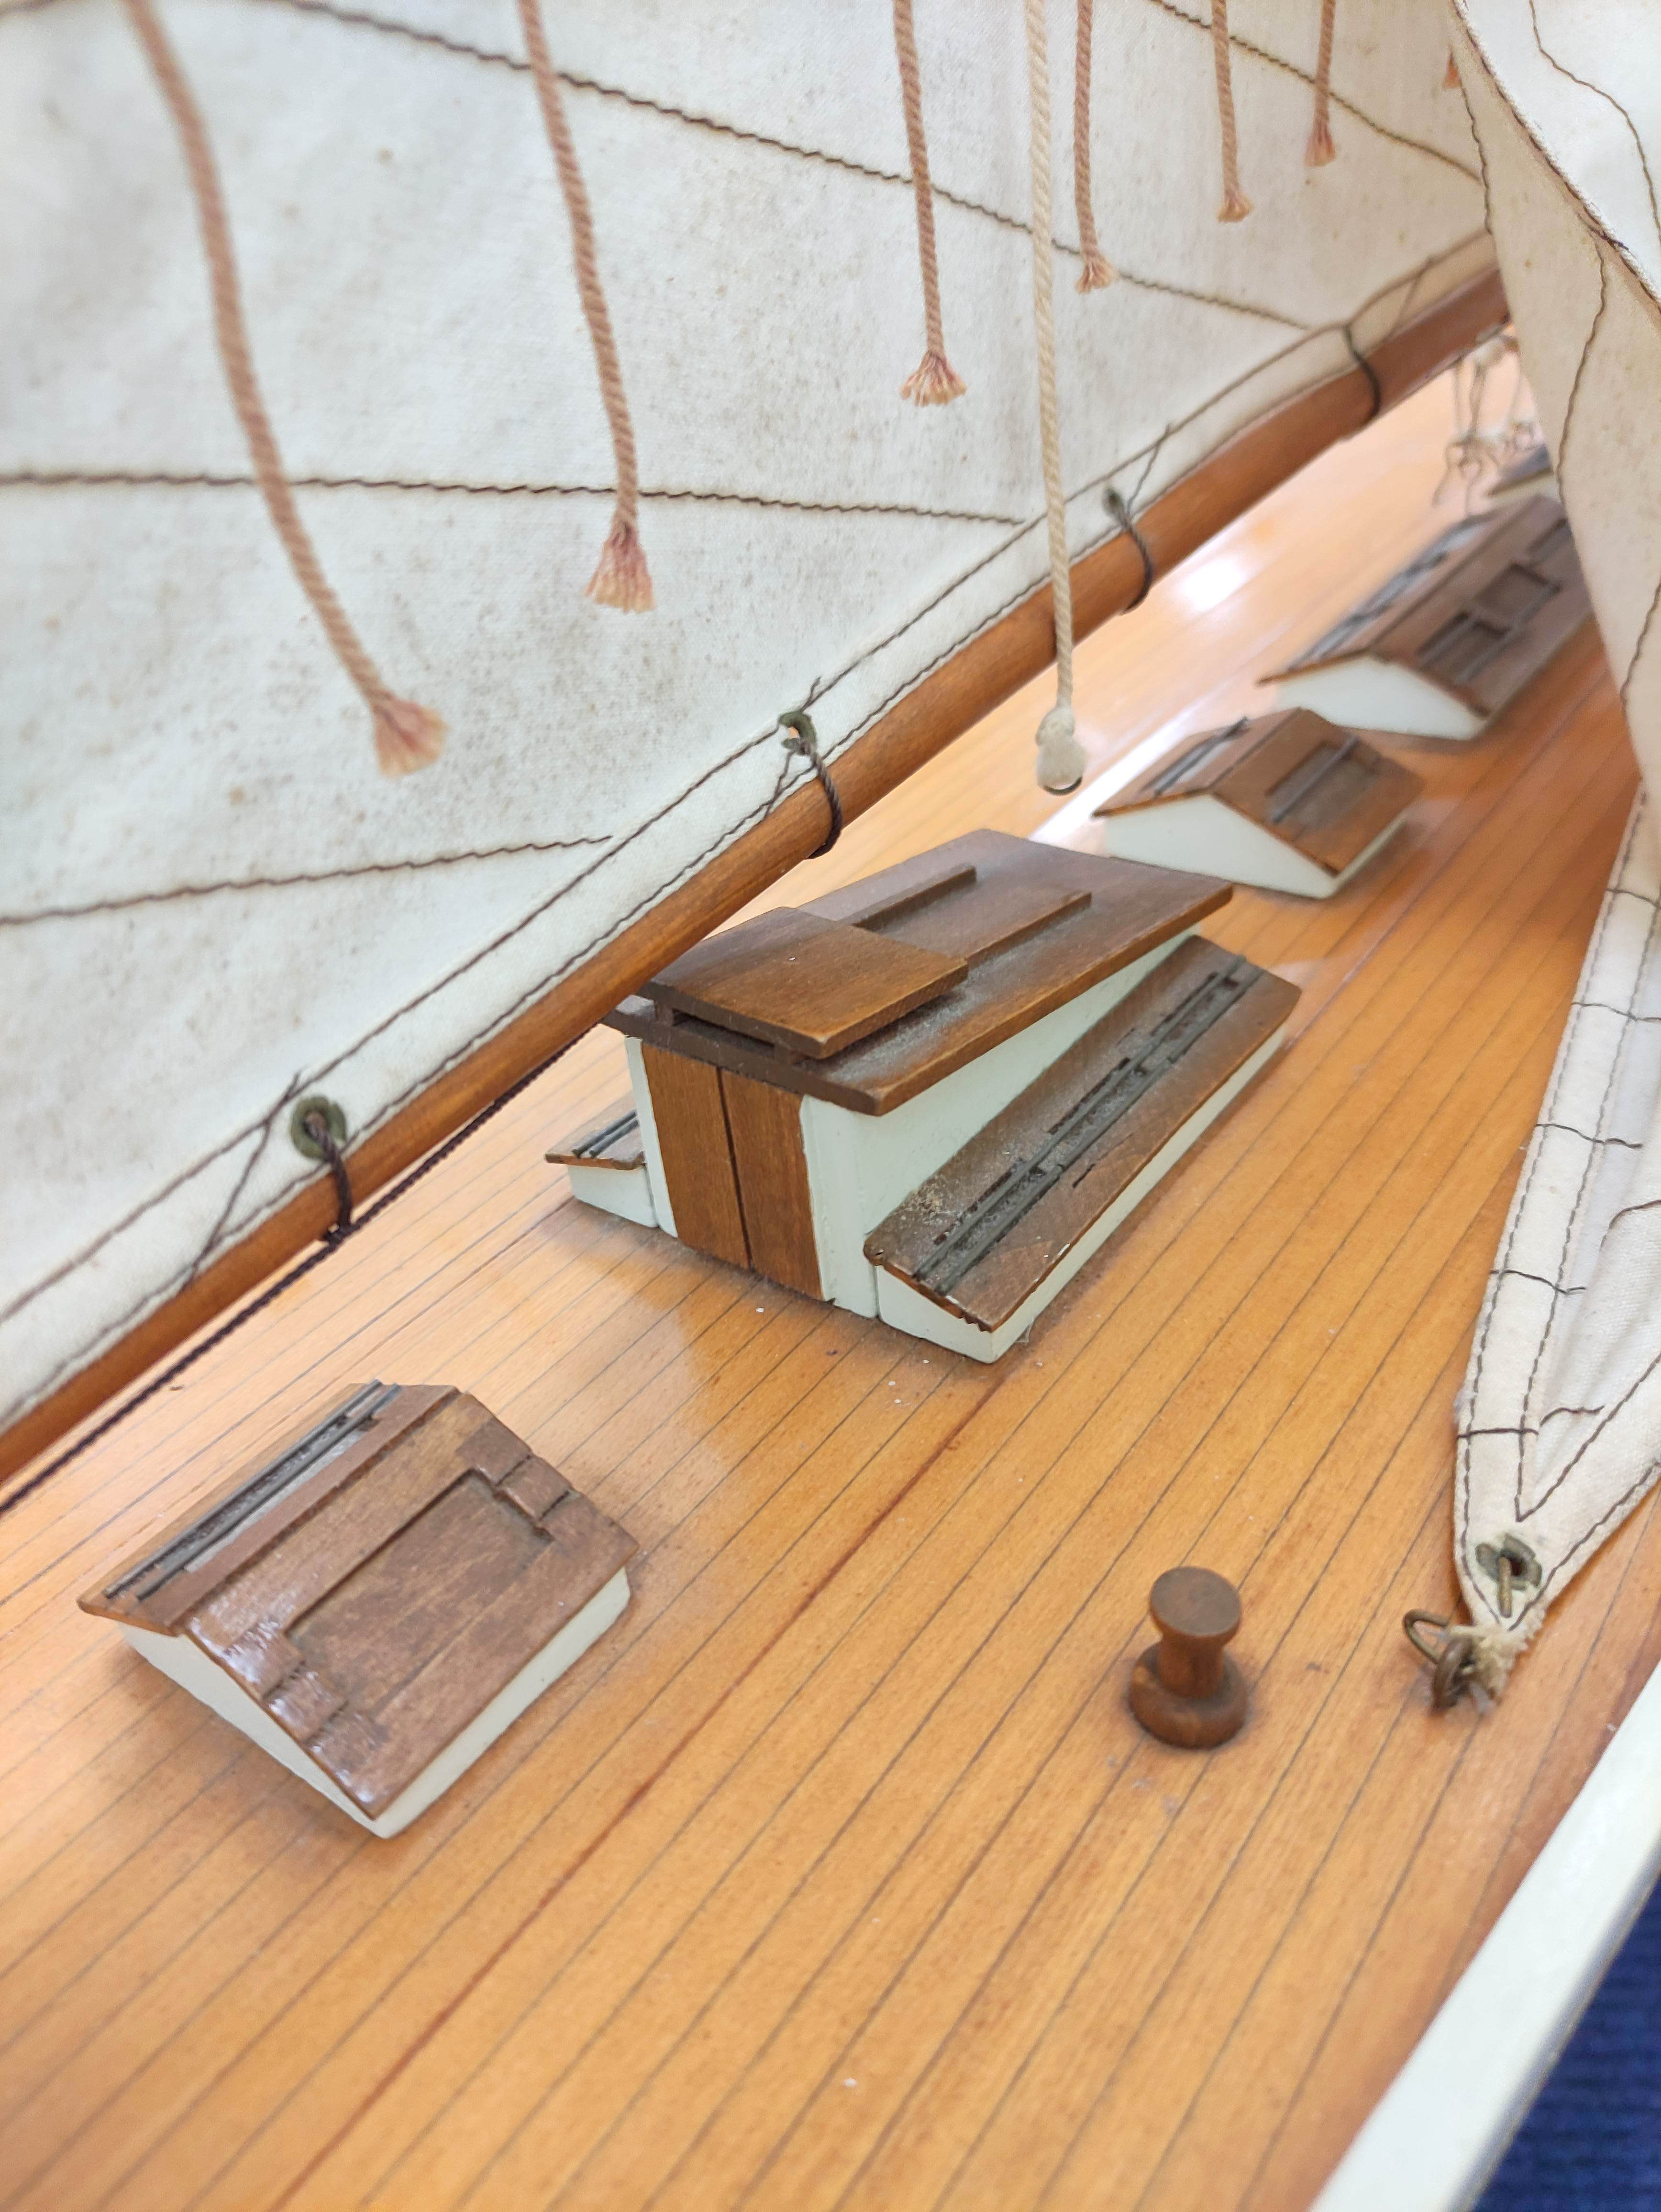 Large model sailing ship by Nauticalia of London with wooden hull and canvas sails. - Image 6 of 6